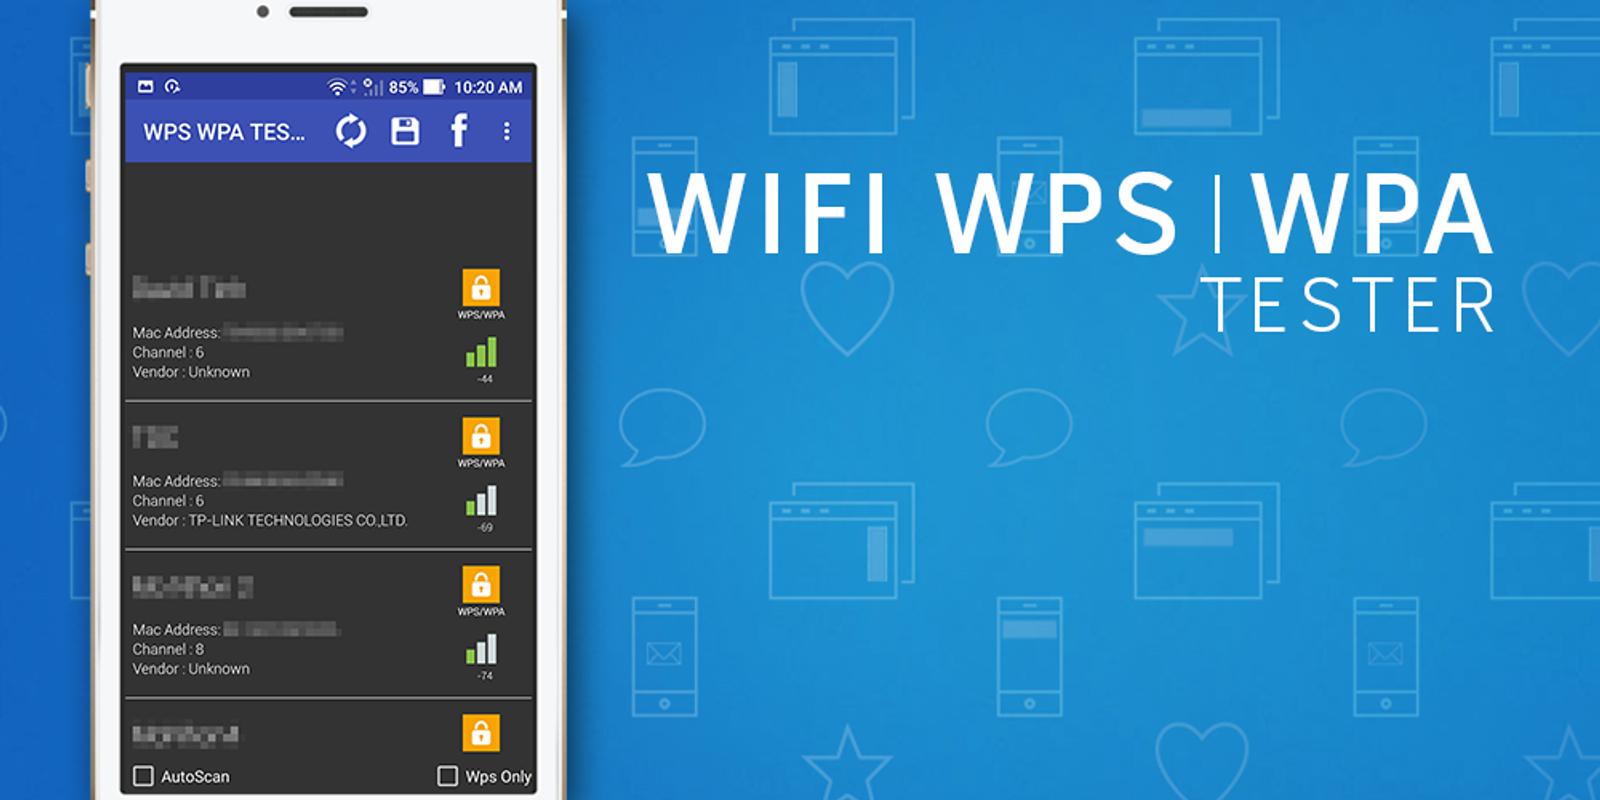 Wps wifi tester. Android WPS. Tester. WPS. Wi Fi Tester PC app.